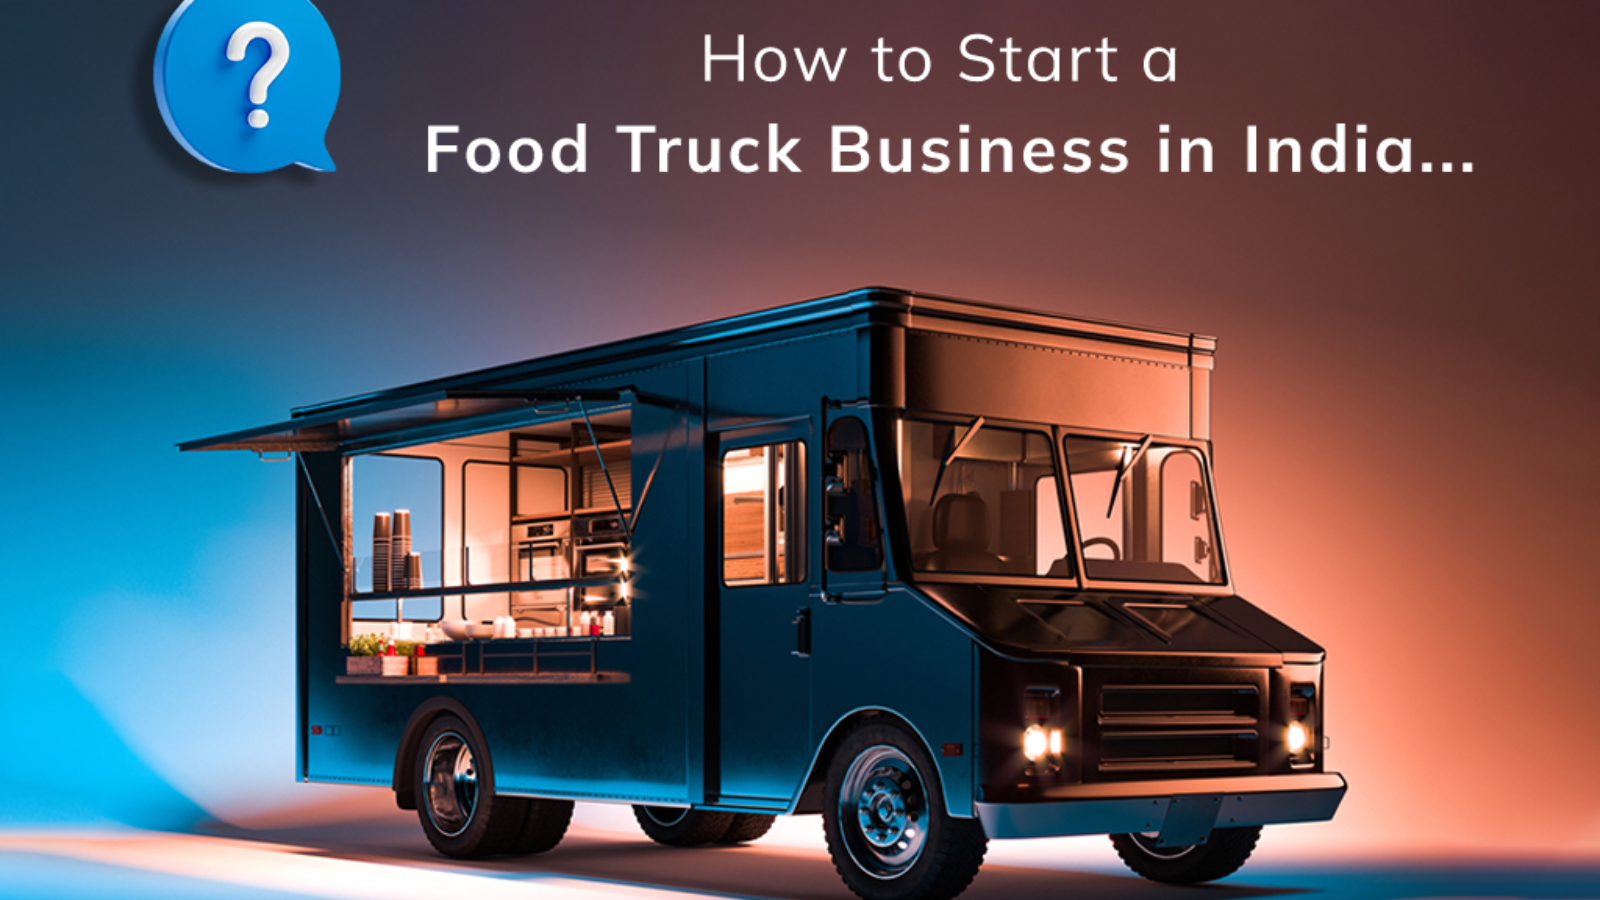 How to Start a Food Truck Business in India